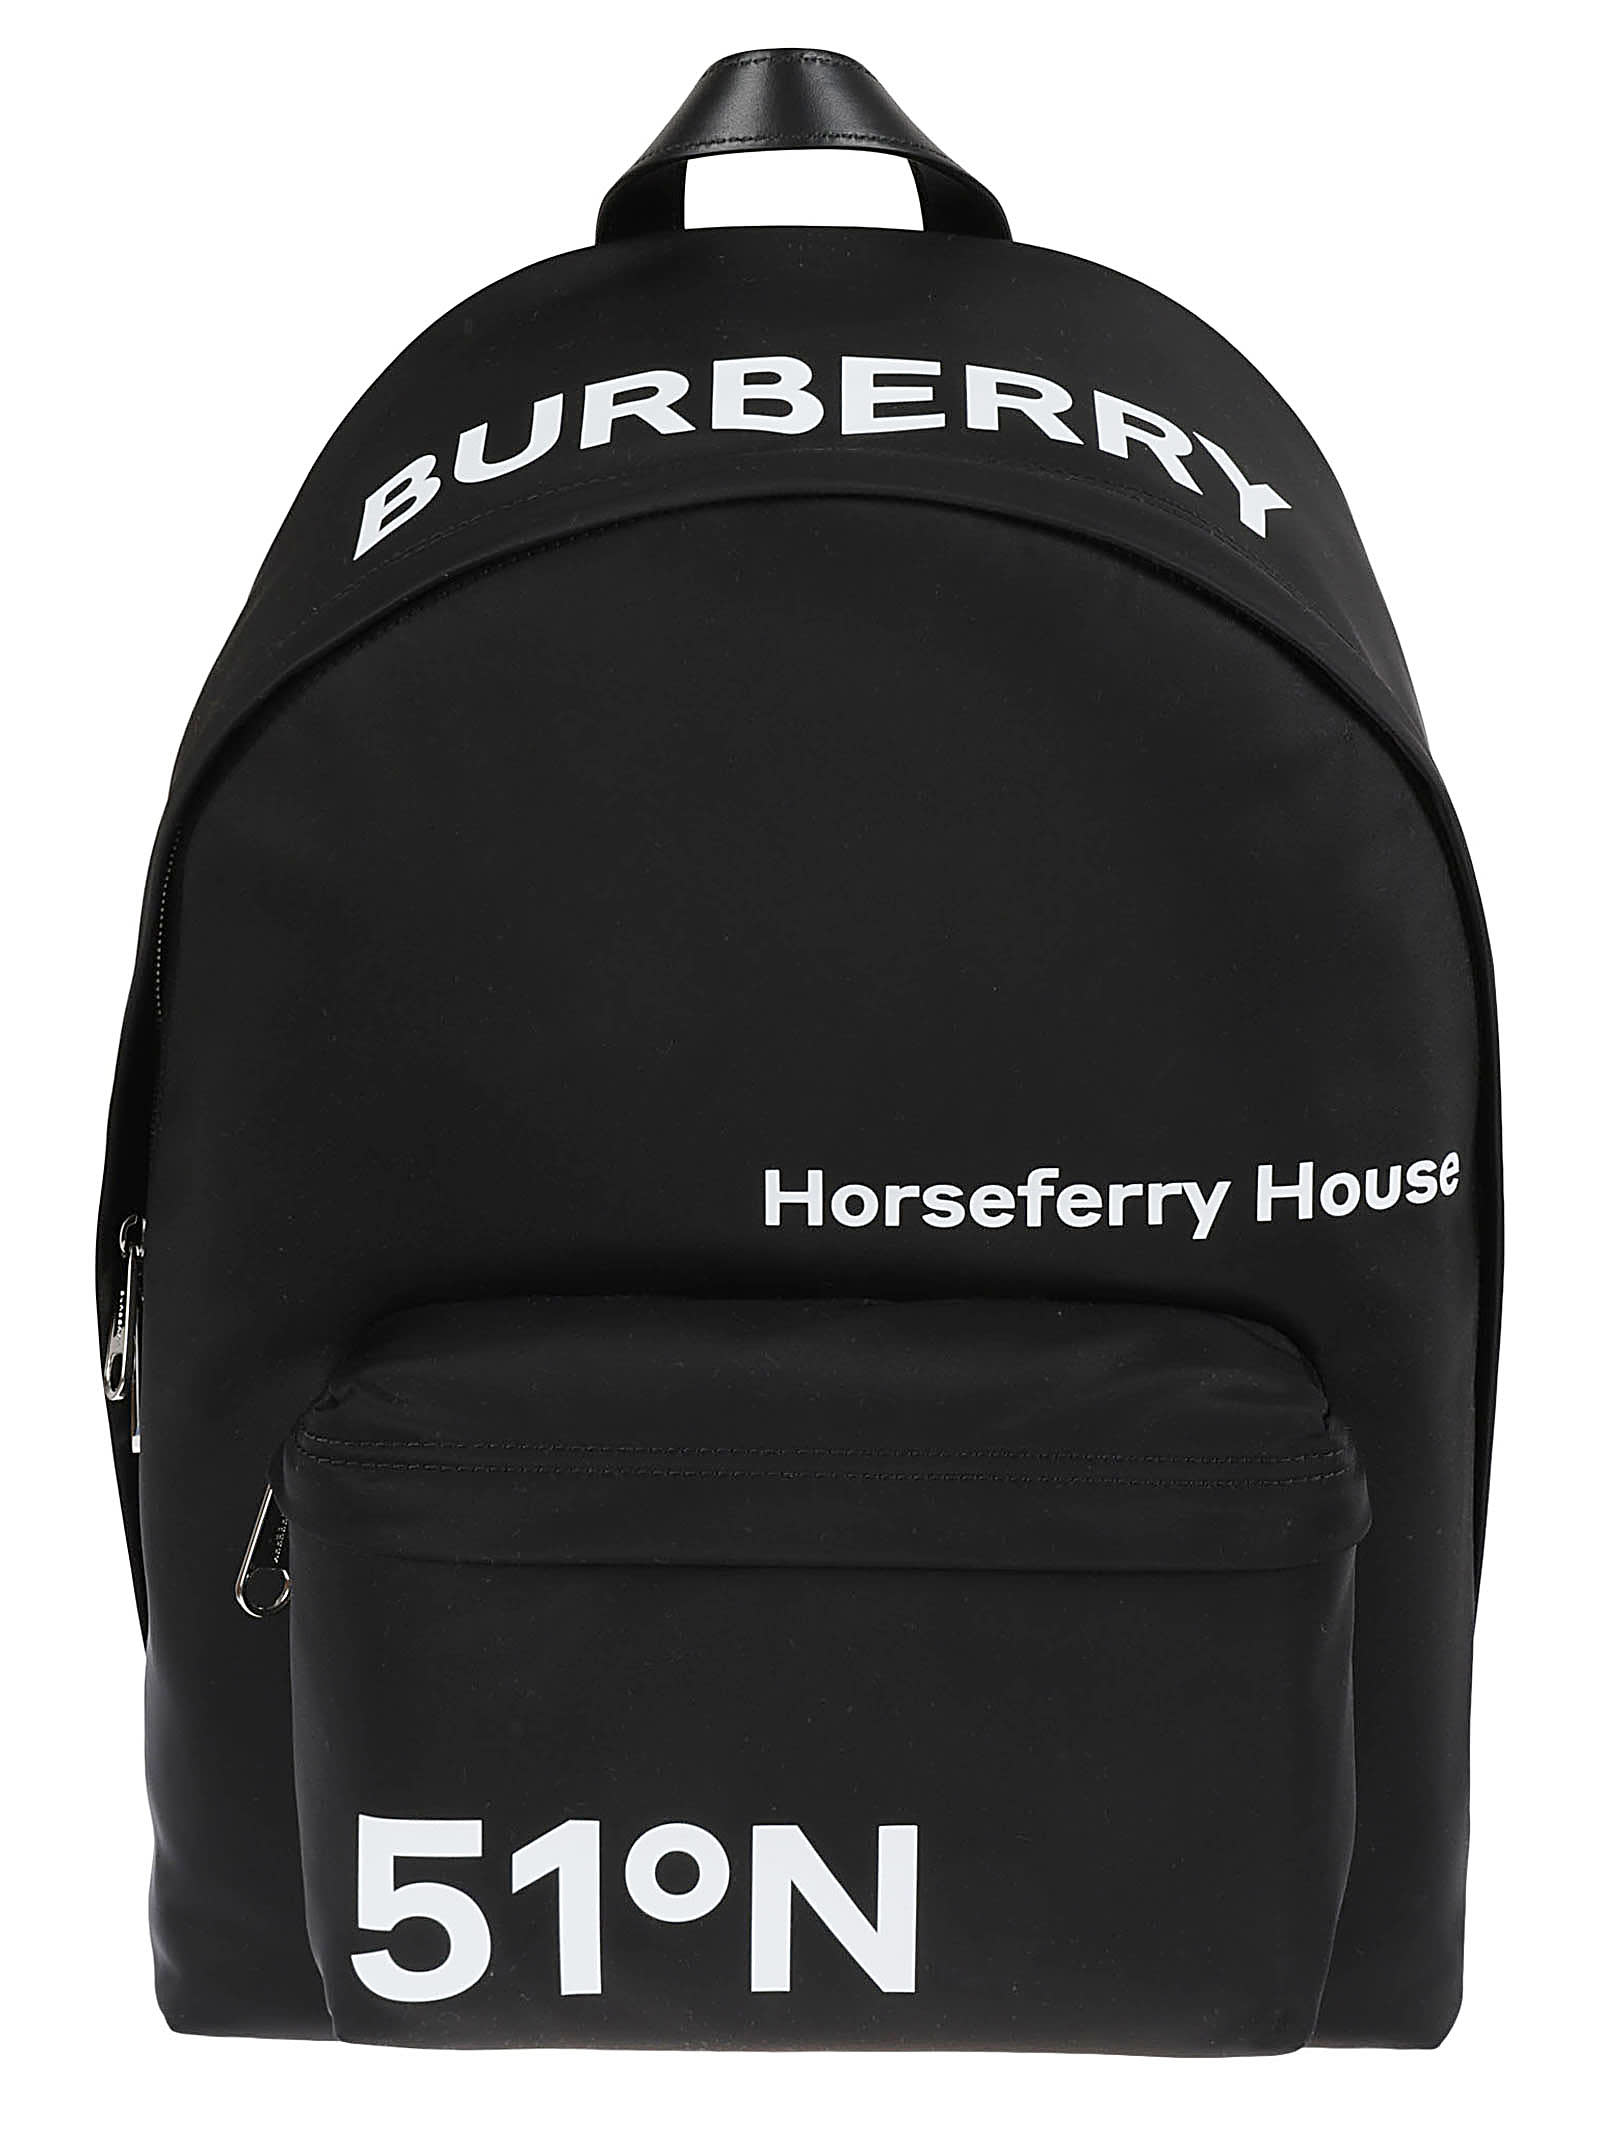 Burberry Horseferry House Backpack